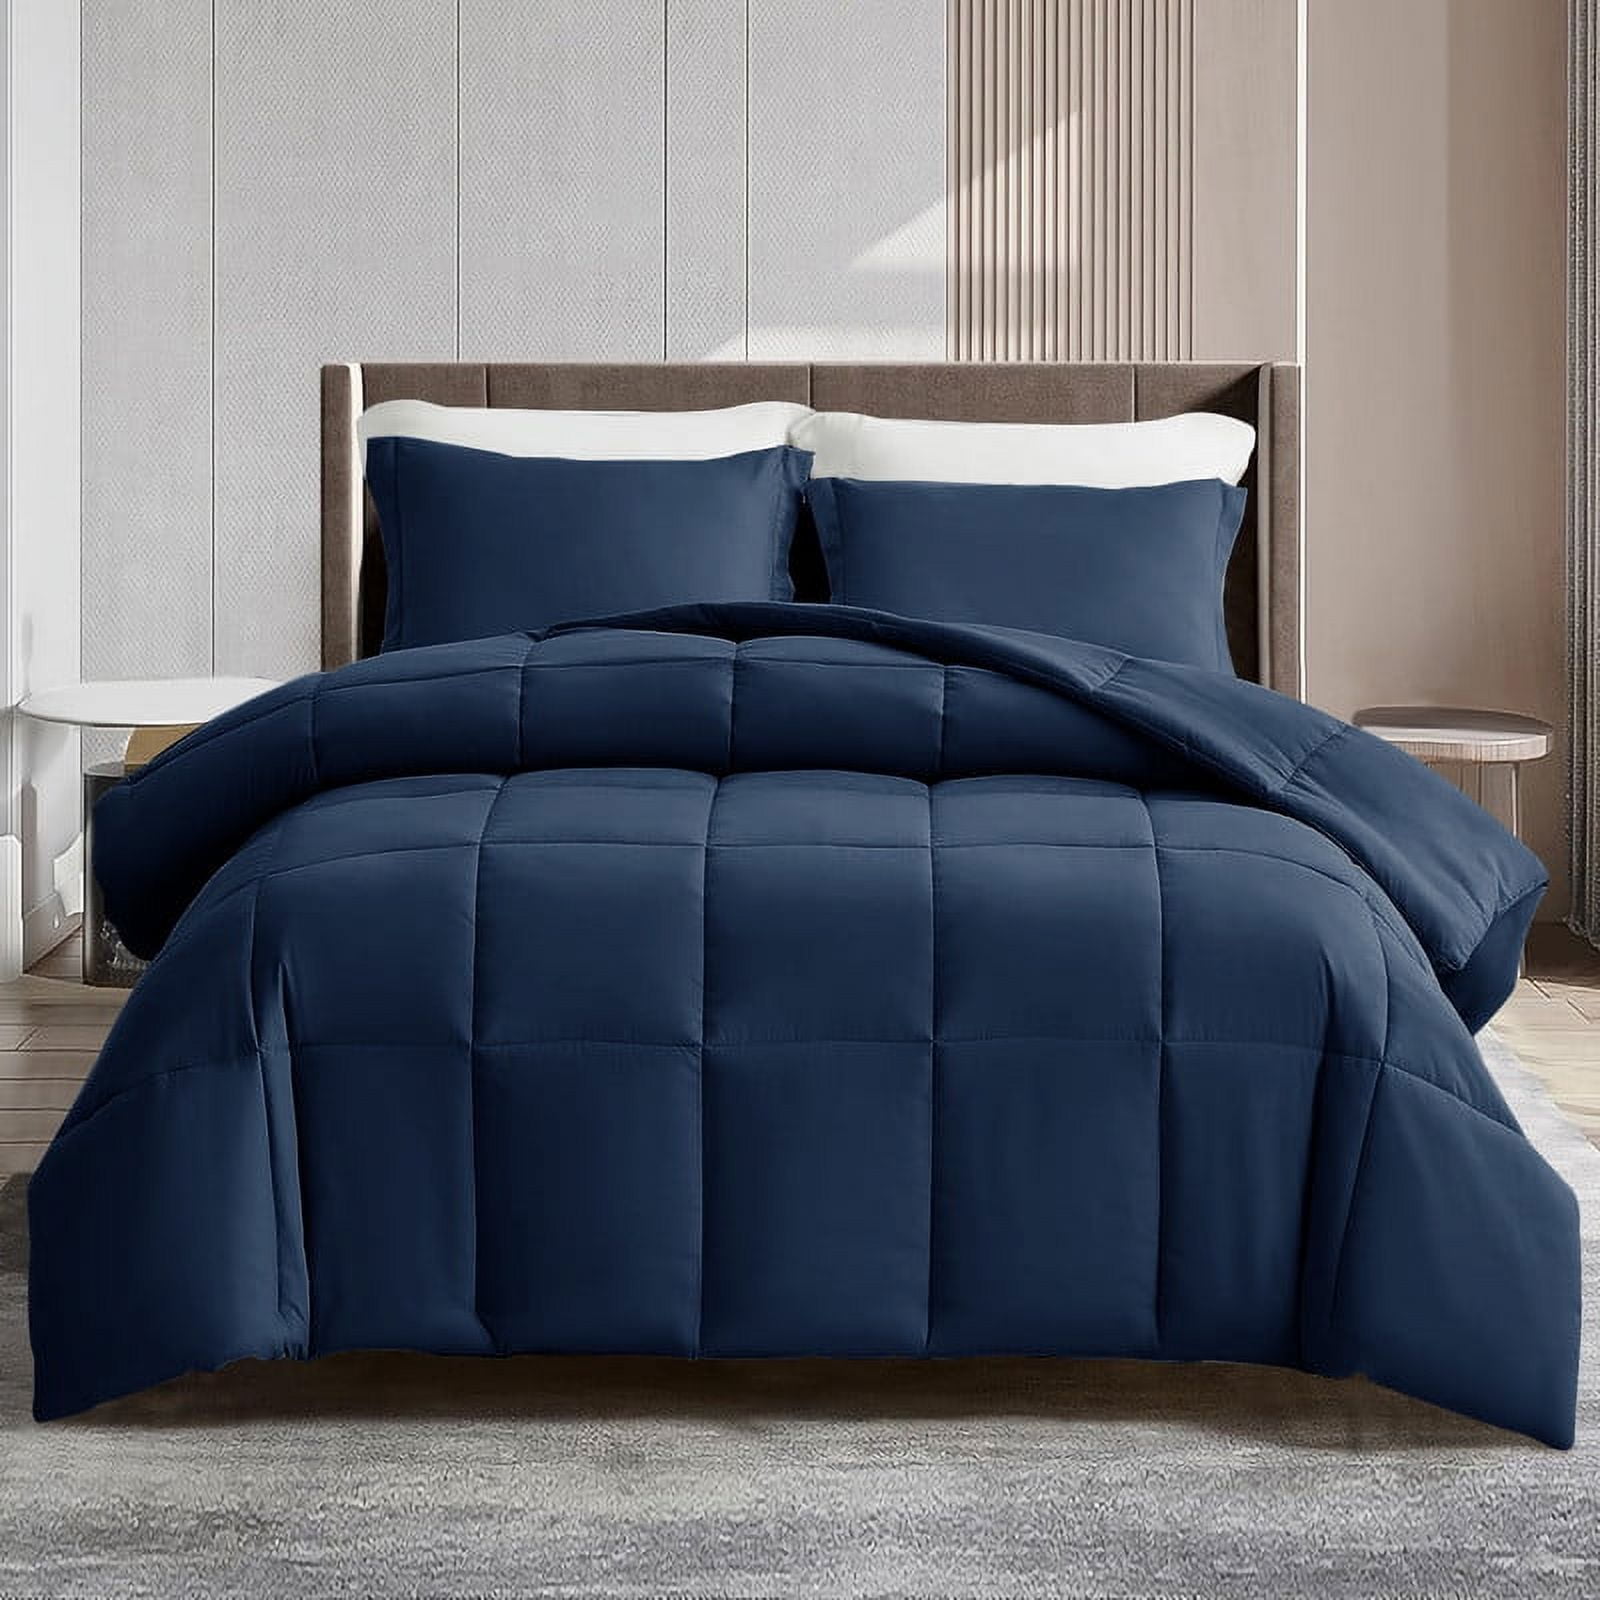 Puffy Deluxe Comforter - Twin/Twin XL - (70W x 88L)